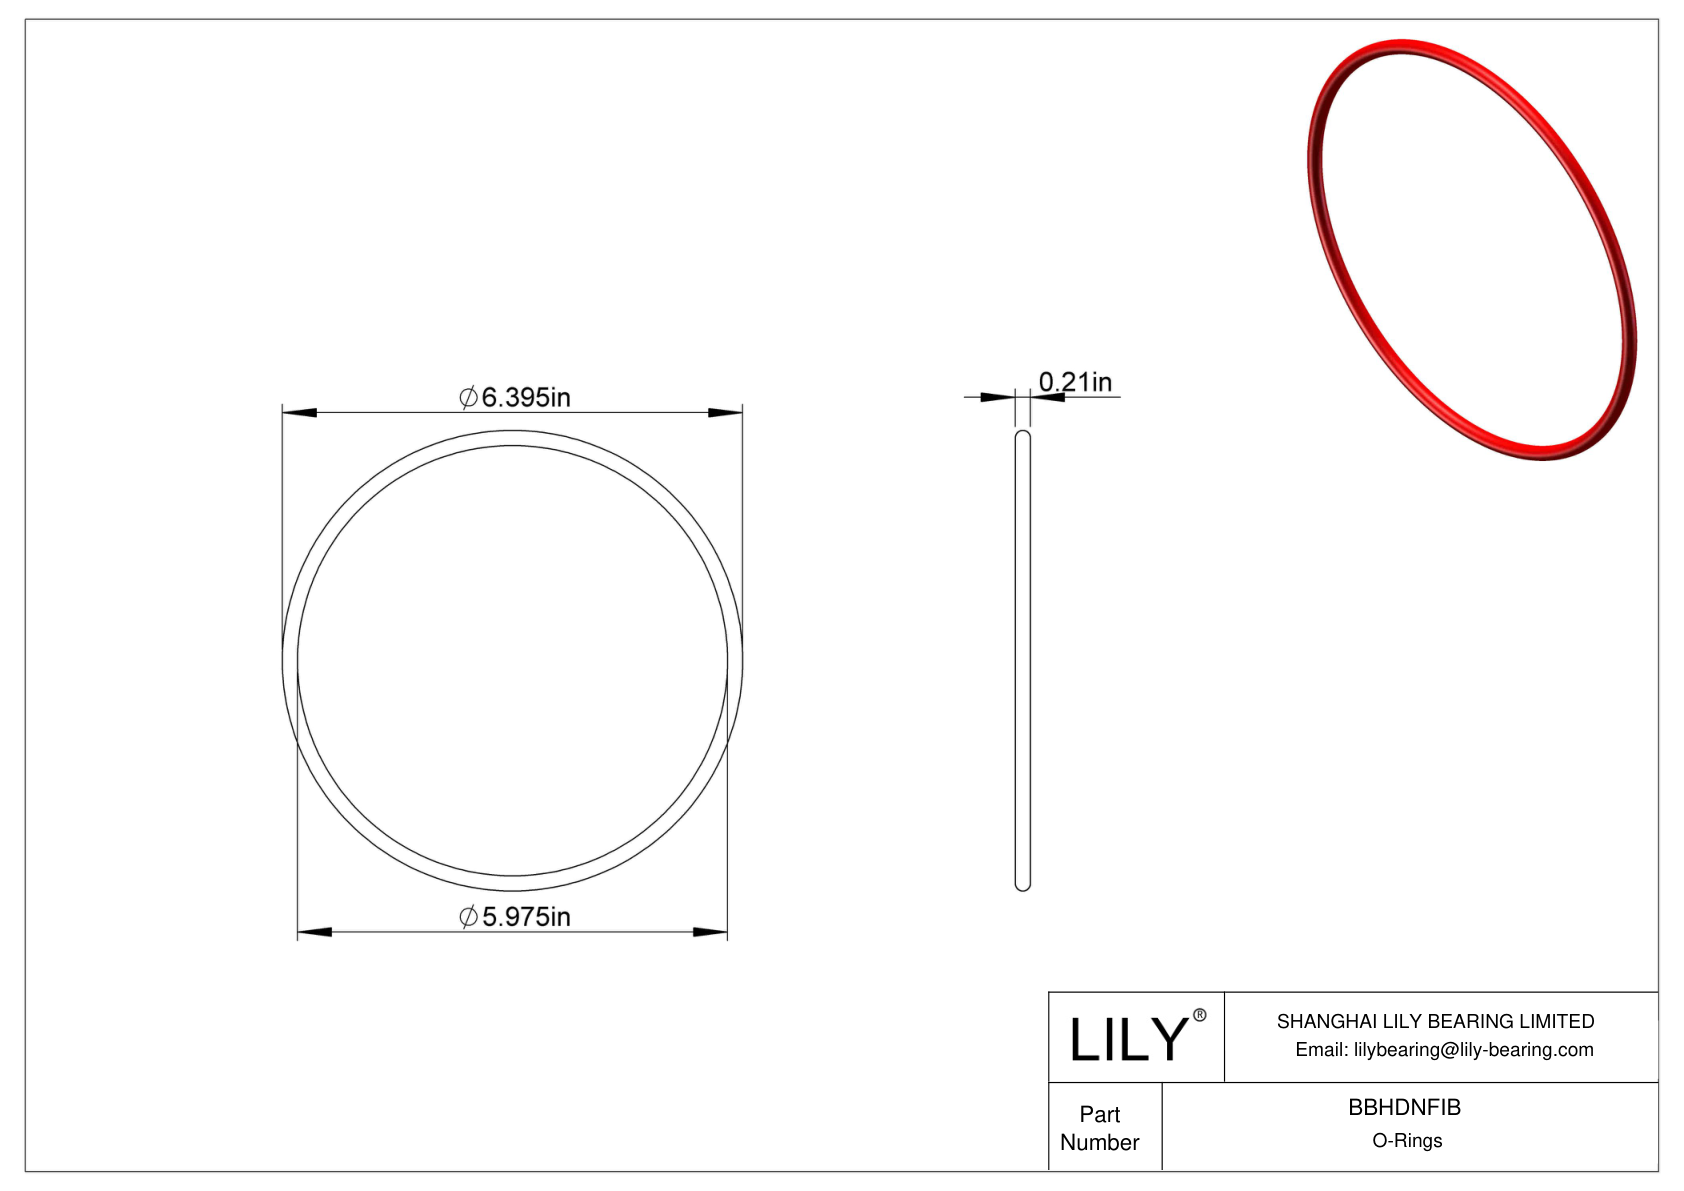 BBHDNFIB High Temperature O-Rings Round cad drawing